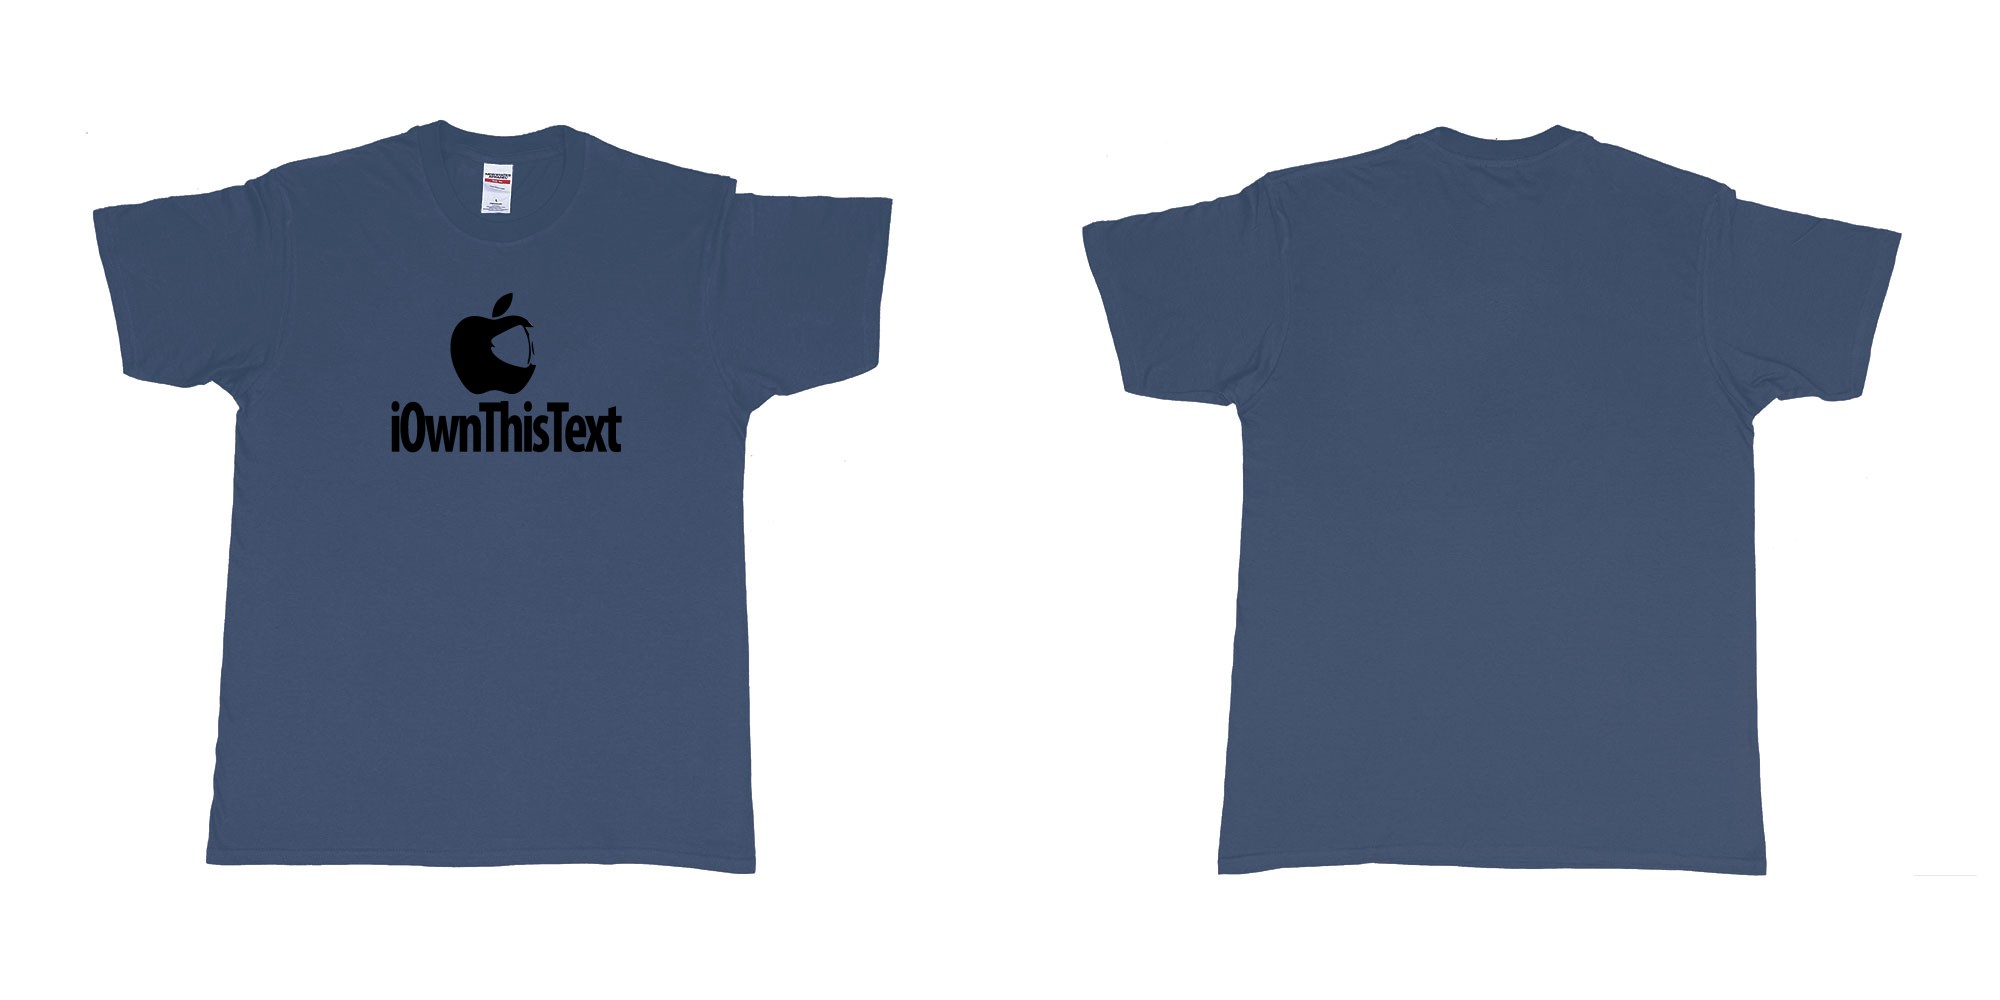 Custom tshirt design Iwanker in fabric color navy choice your own text made in Bali by The Pirate Way